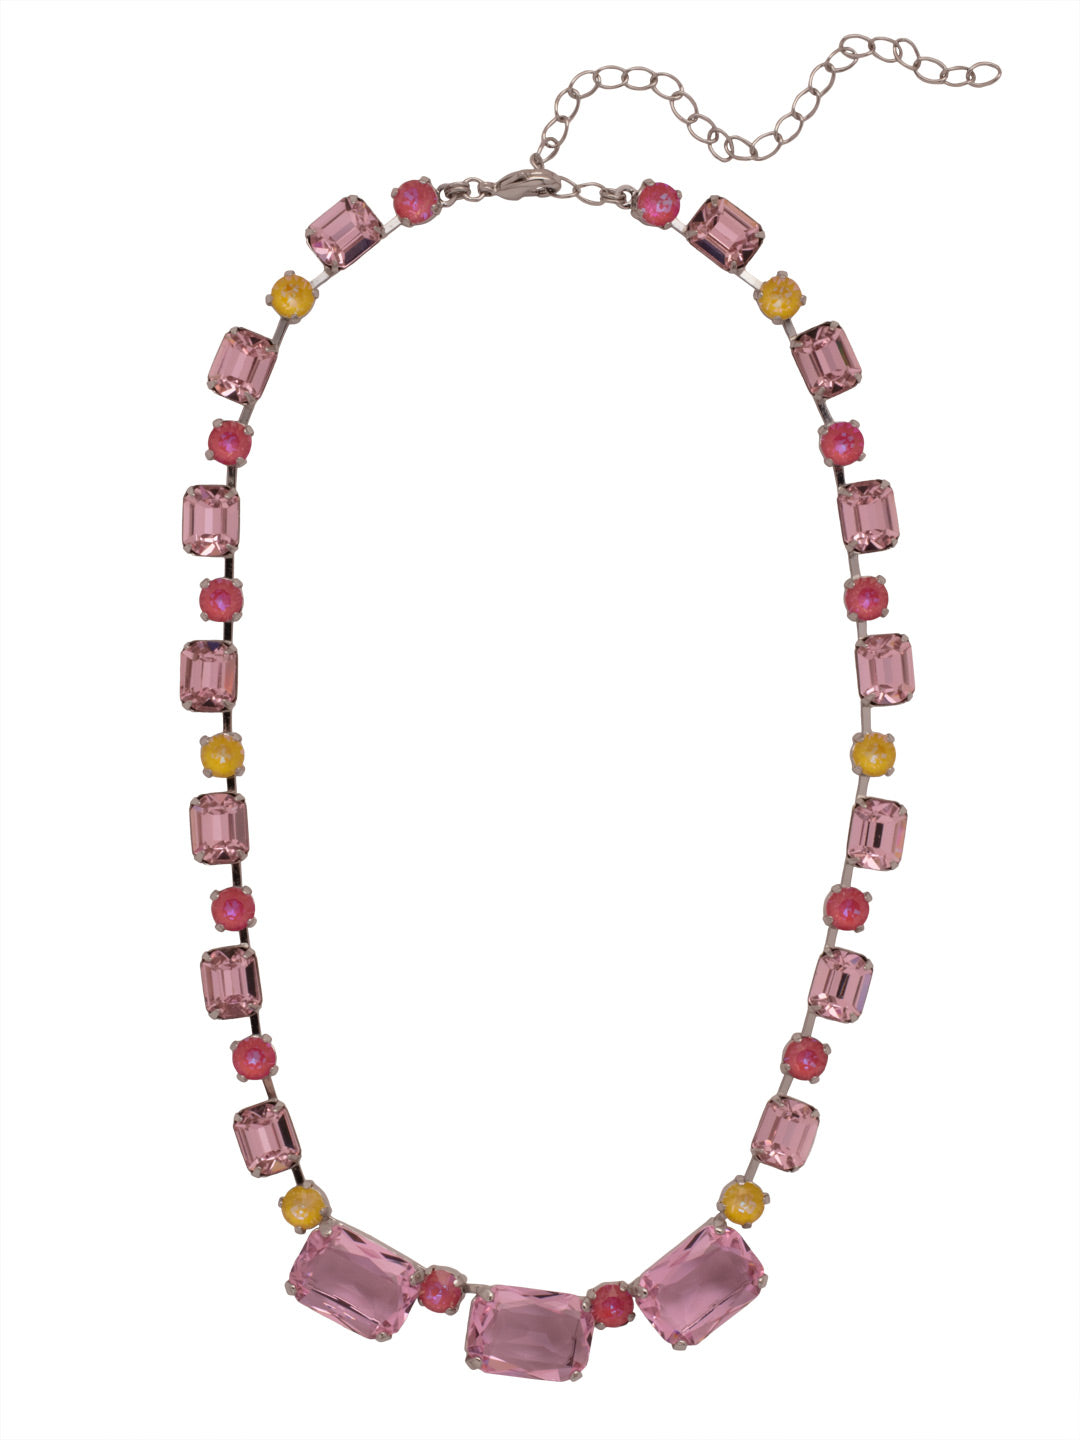 Cornelia Tennis Necklace - NFF9PDPPN - <p>The Cornelia Tennis Necklace features alternating round and emerald cut crystals on an adjustable chain, secured by a lobster claw clasp. From Sorrelli's Pink Pineapple collection in our Palladium finish.</p>